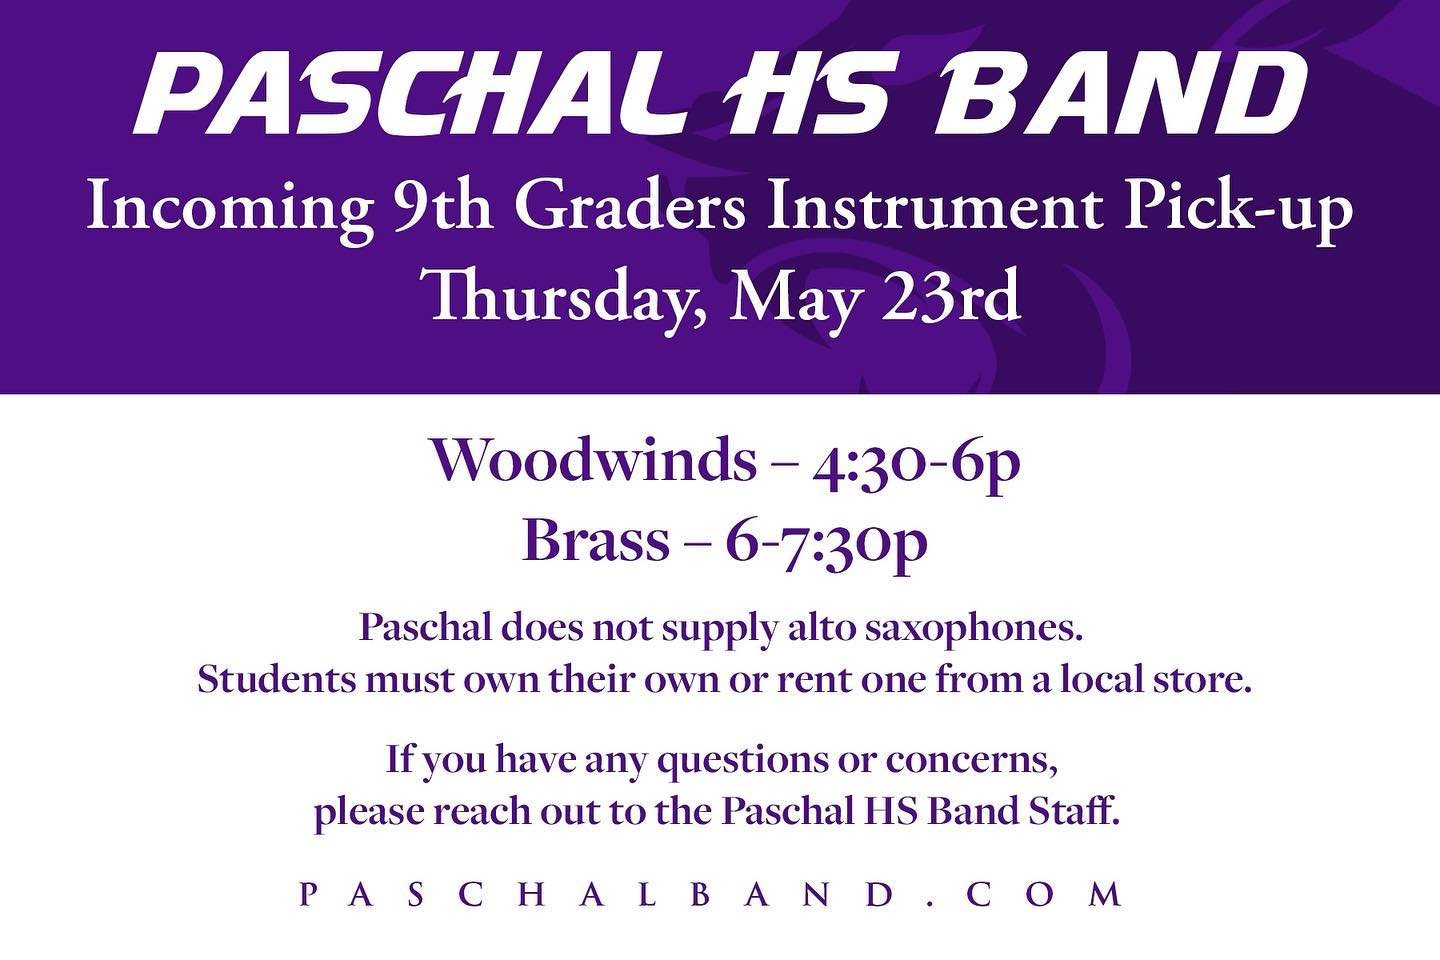 Incoming 9th graders: Come and pick-up your instrument from Paschal! Instrument rental fee is $80. It is NOT due at the time that you pick up your instrument. See you soon!